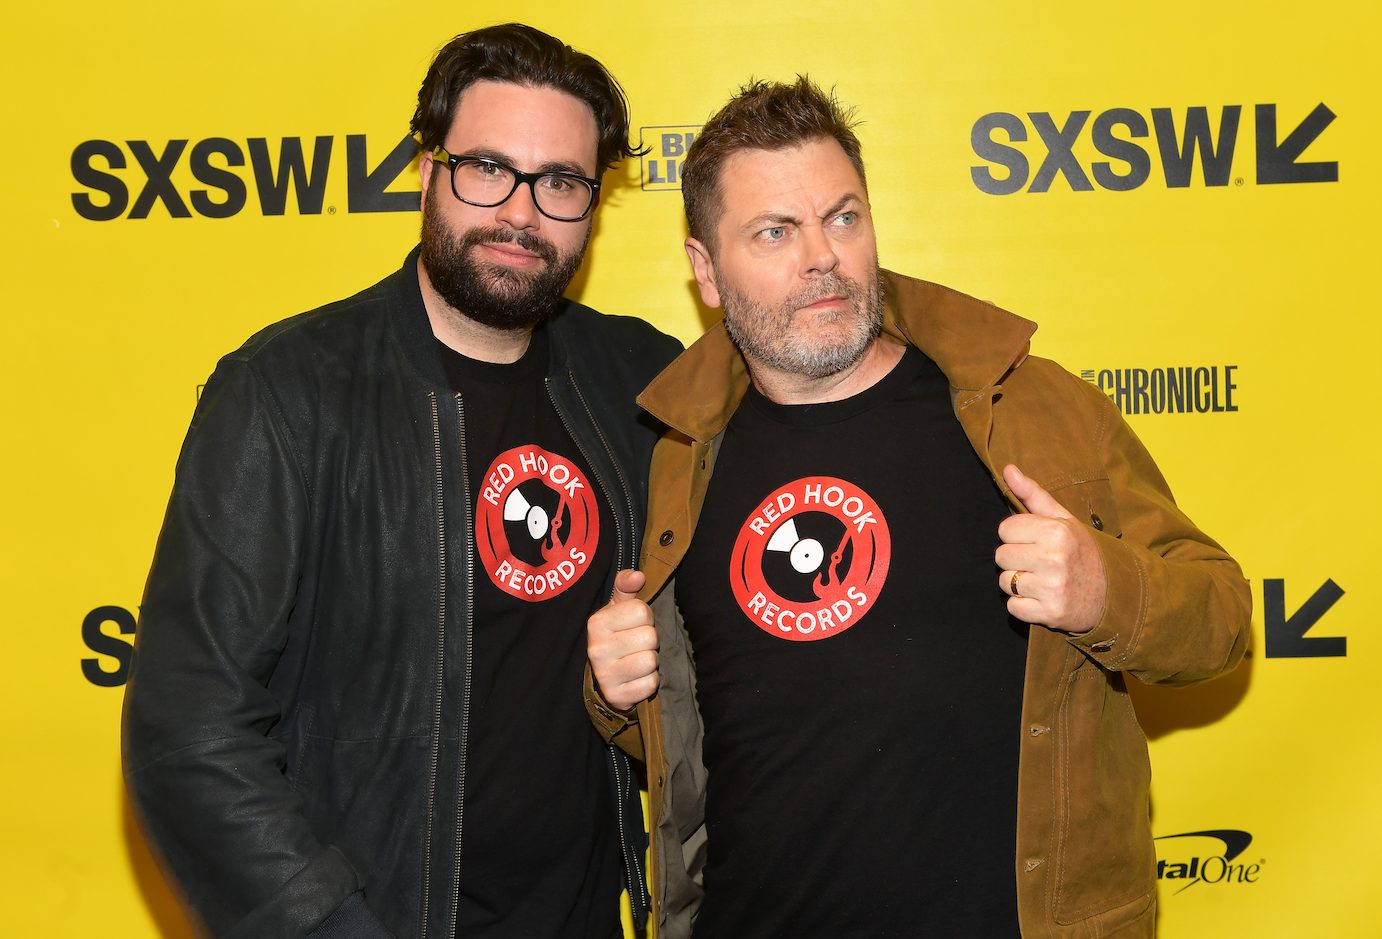 Director Brett Haley and Nick Offerman at the Hearts Beat Loud screening at the Paramount Theatre. Photo by Matt Winkelmeyer/Getty Images for SXSW